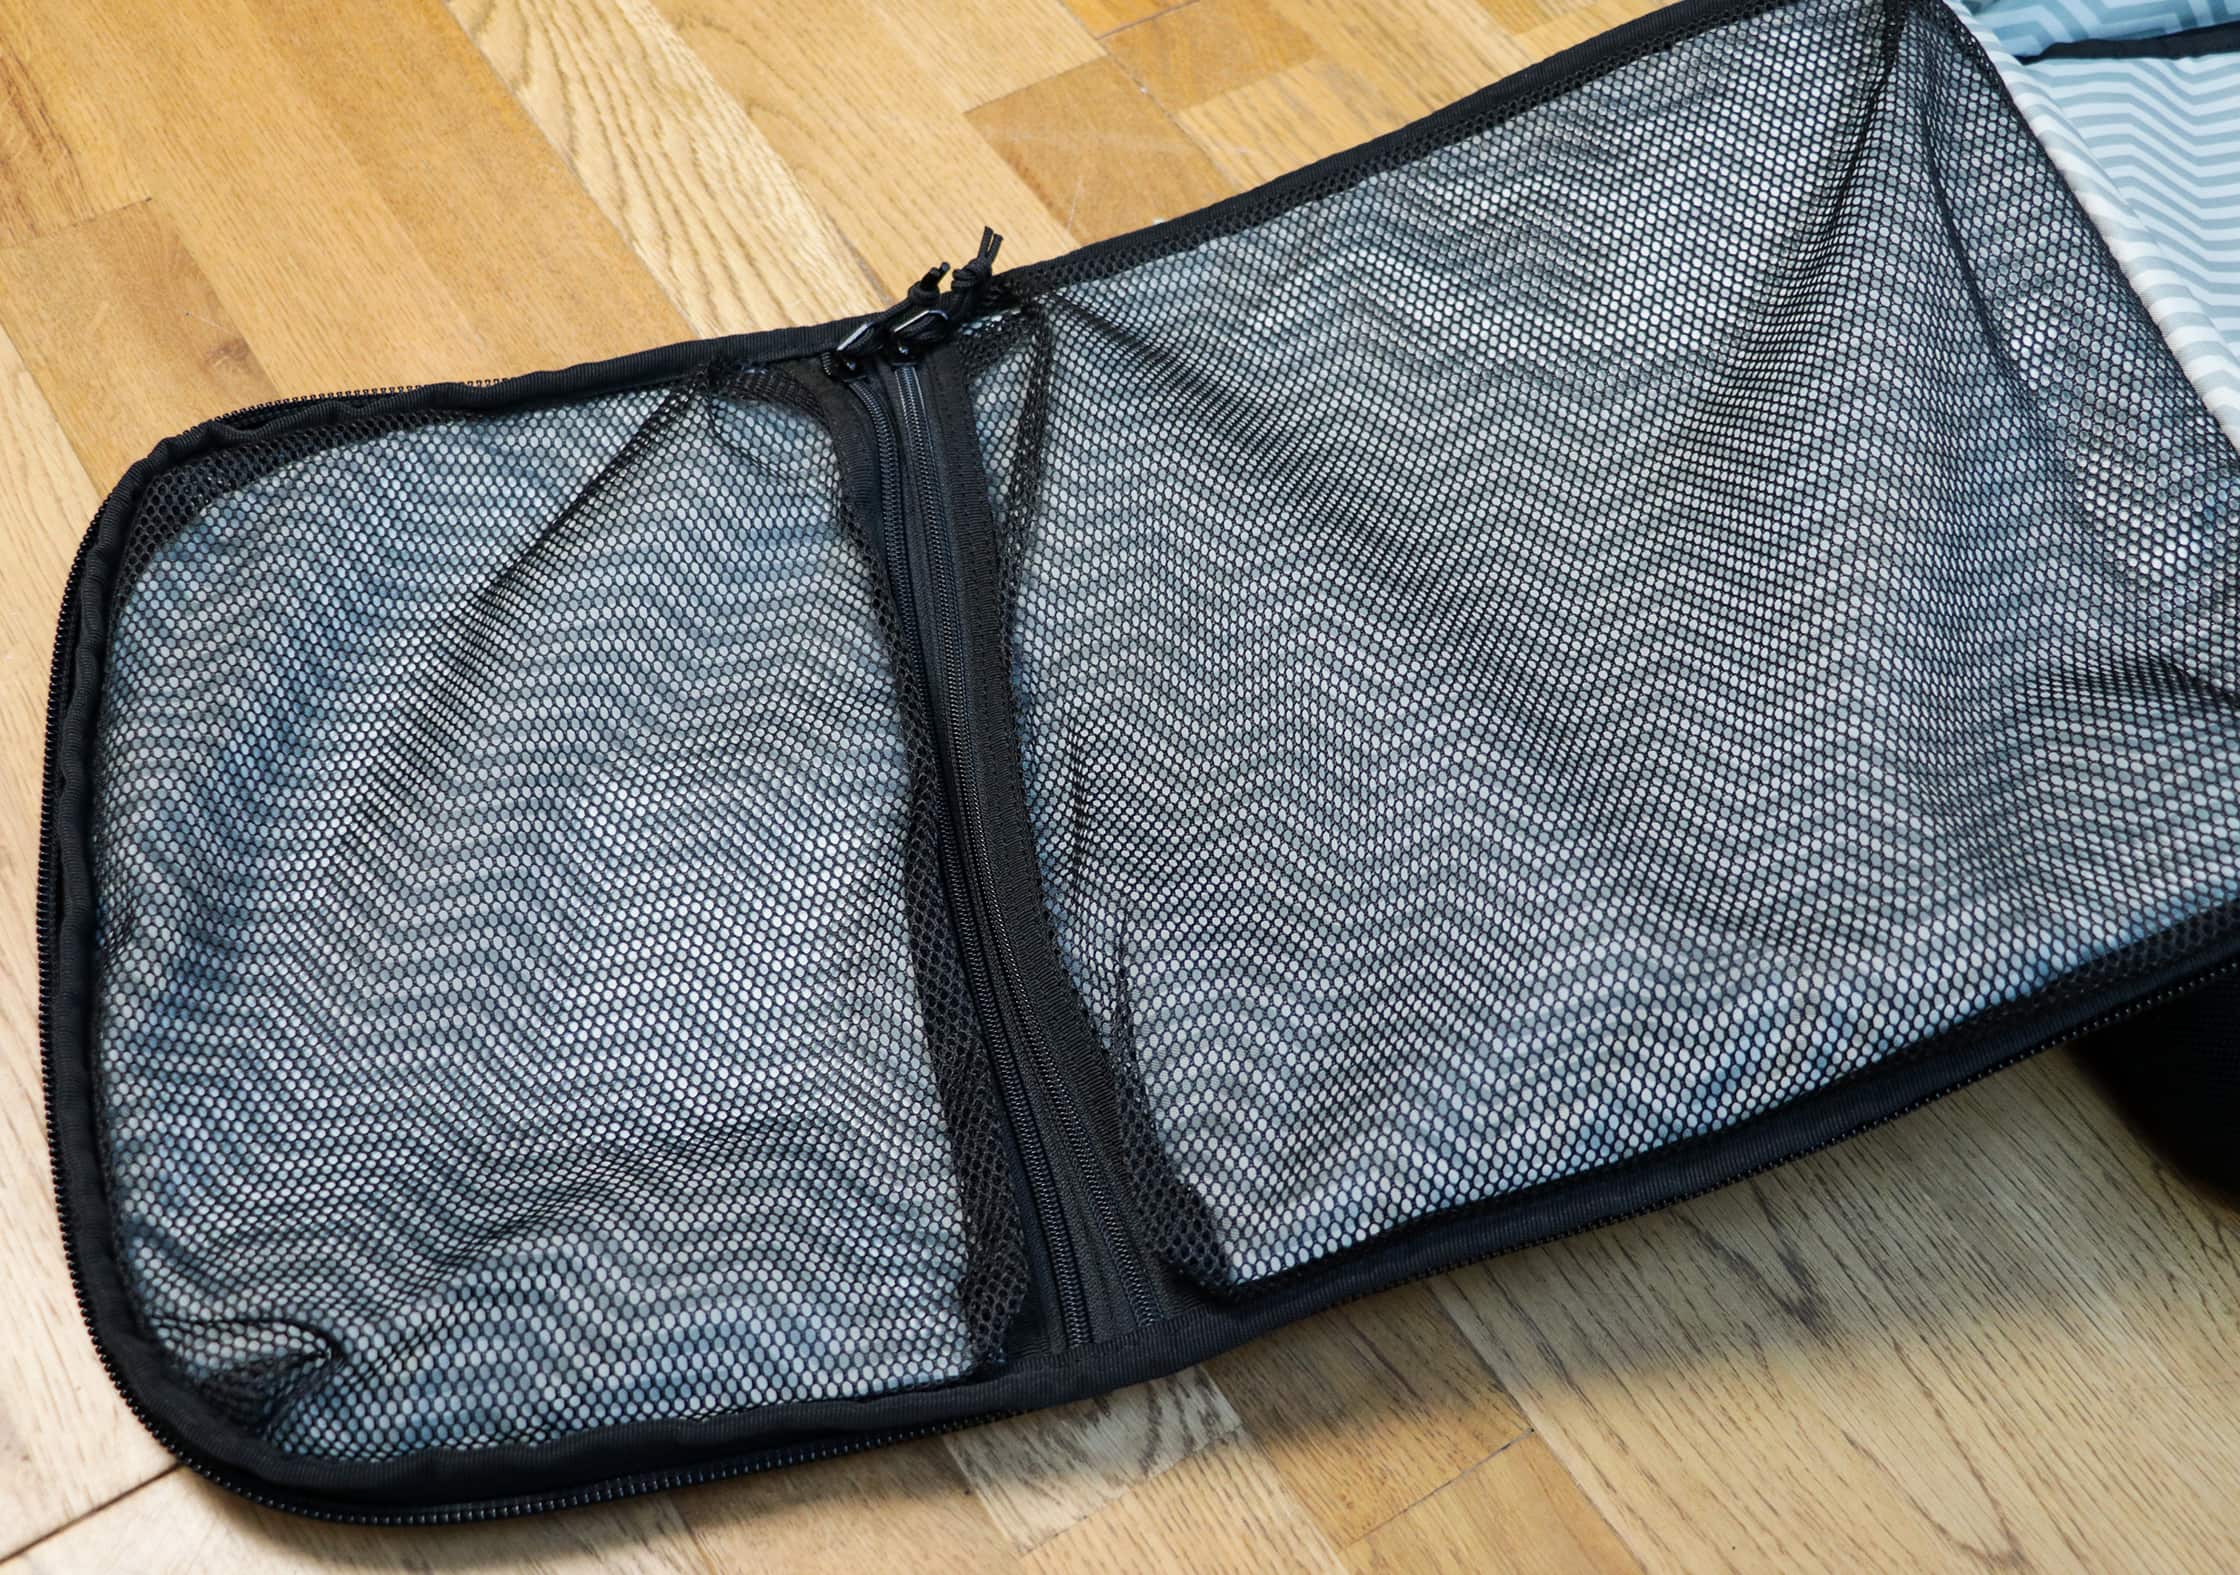 Mesh Compartments Inside The Heimplanet Monolith Weekender